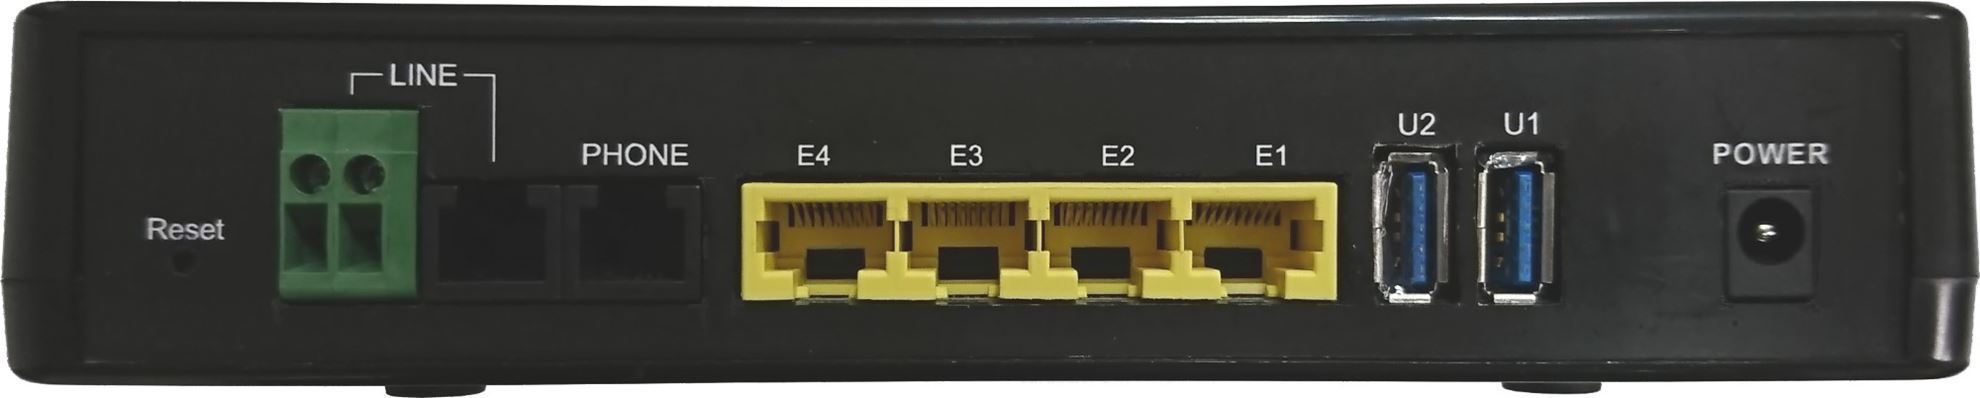 NETSYS G.Fast Slave Modem with 4 Gigabit Point to Point LAN Ports. Supports G.fa